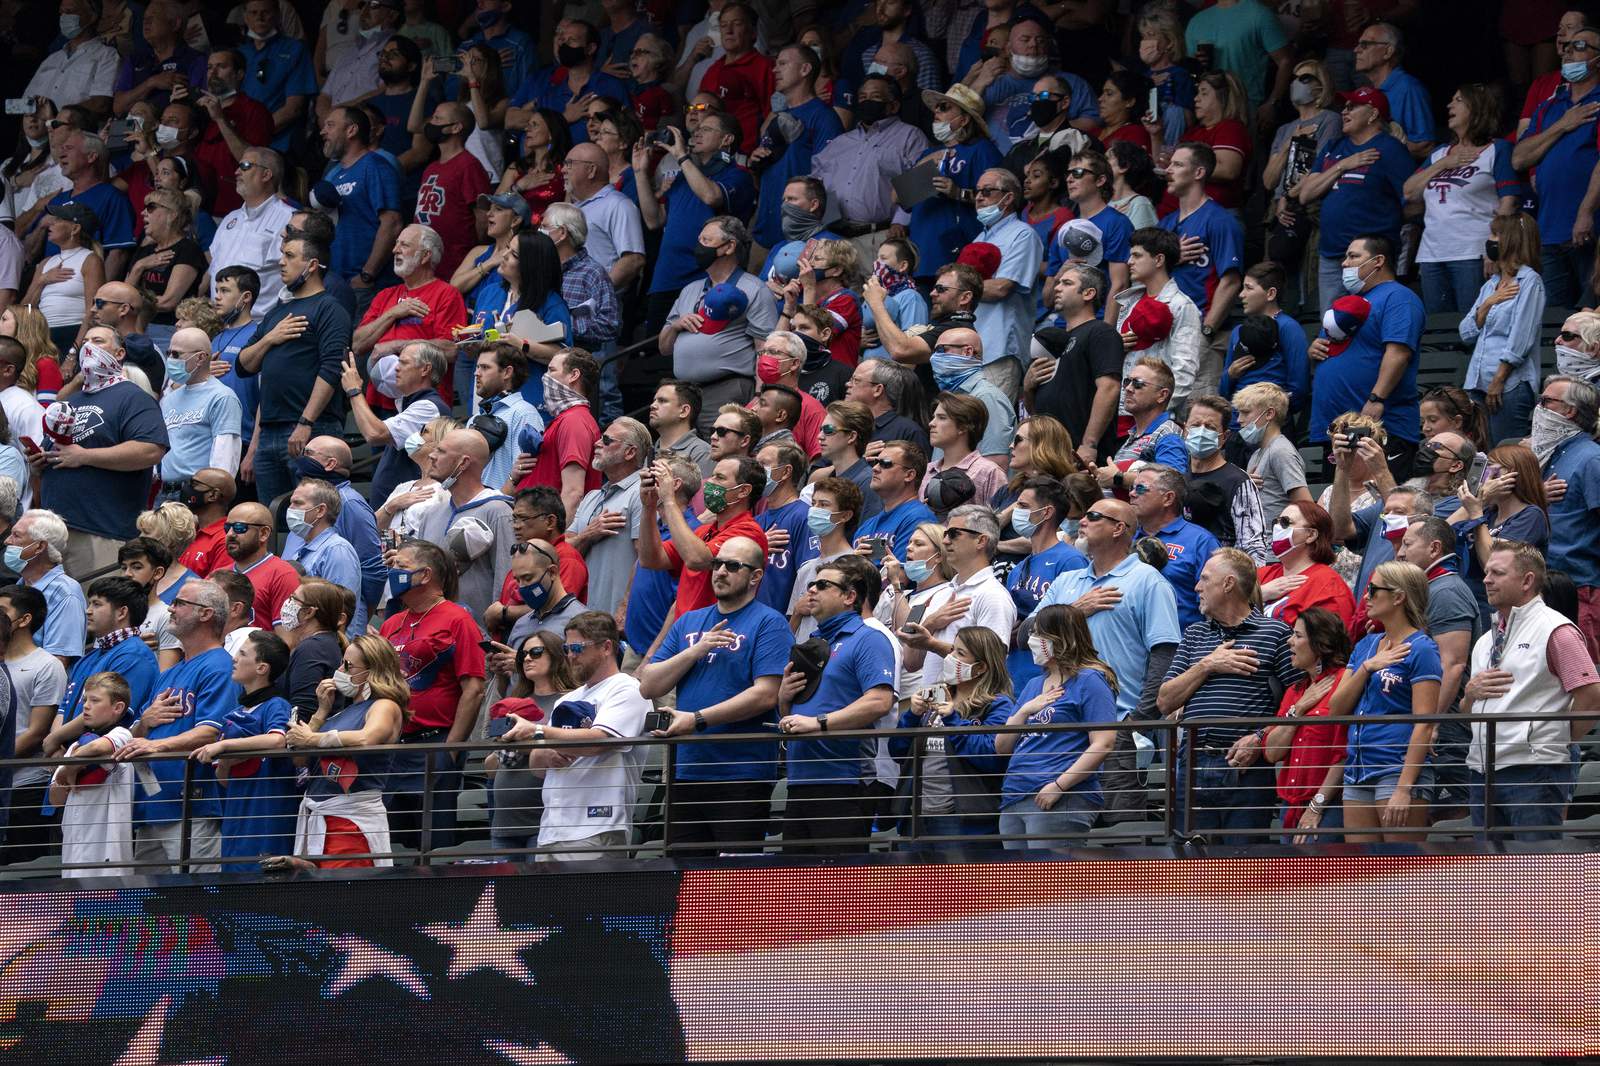 Rangers fill stands with fans, who accept ‘calculated risk’